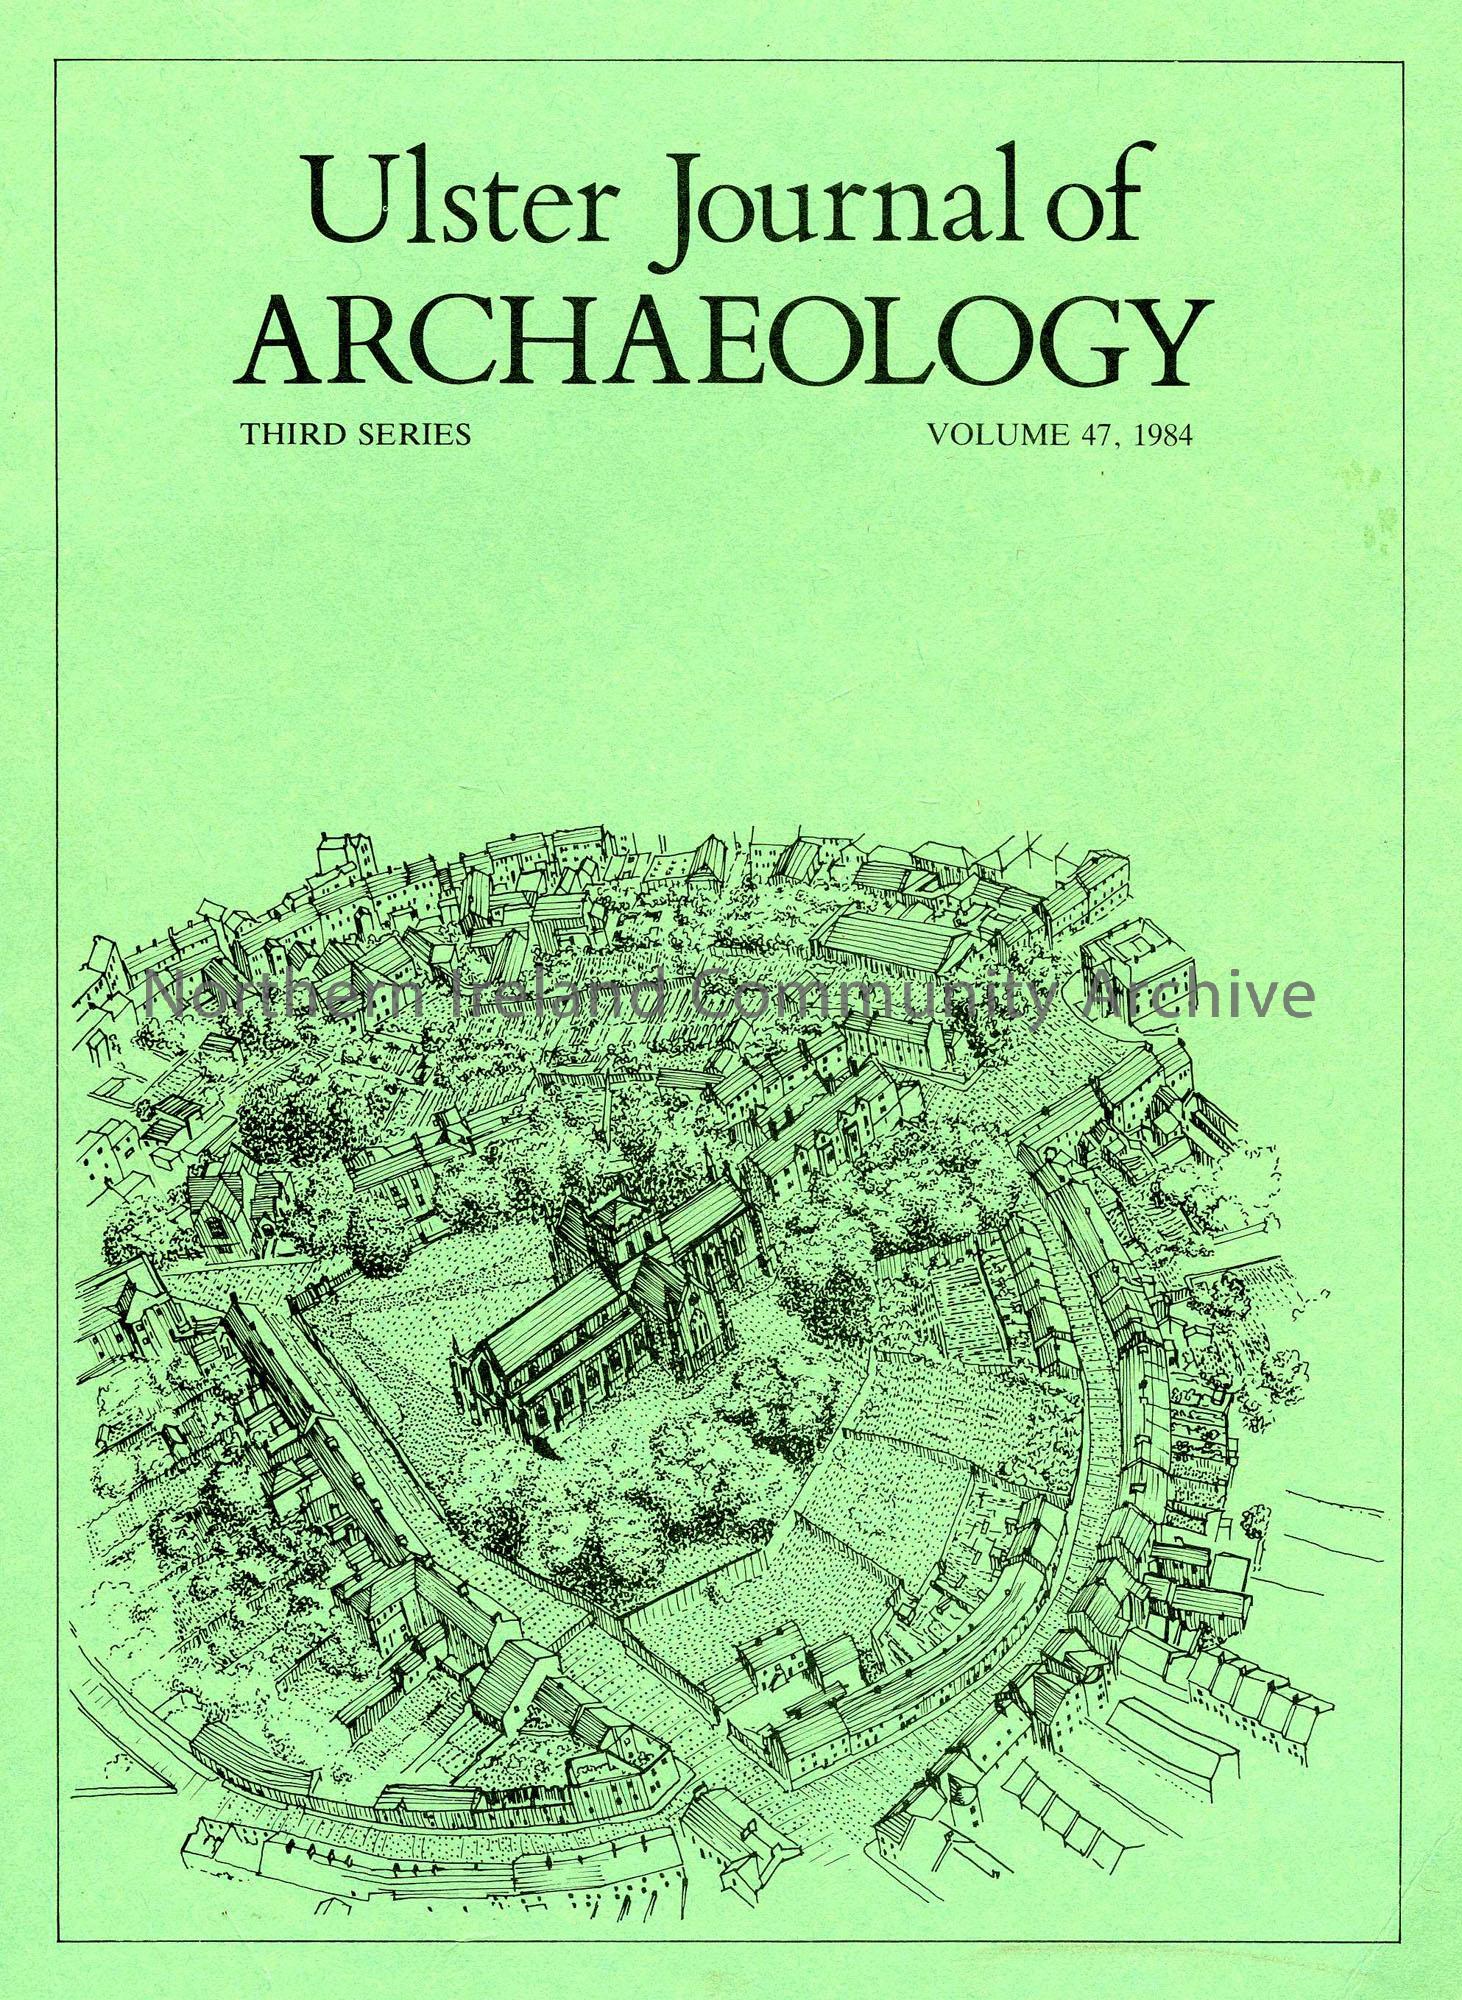 book titled, Ulster Journal of Archaeology. Third Series Volume 47, 1984 (4971)